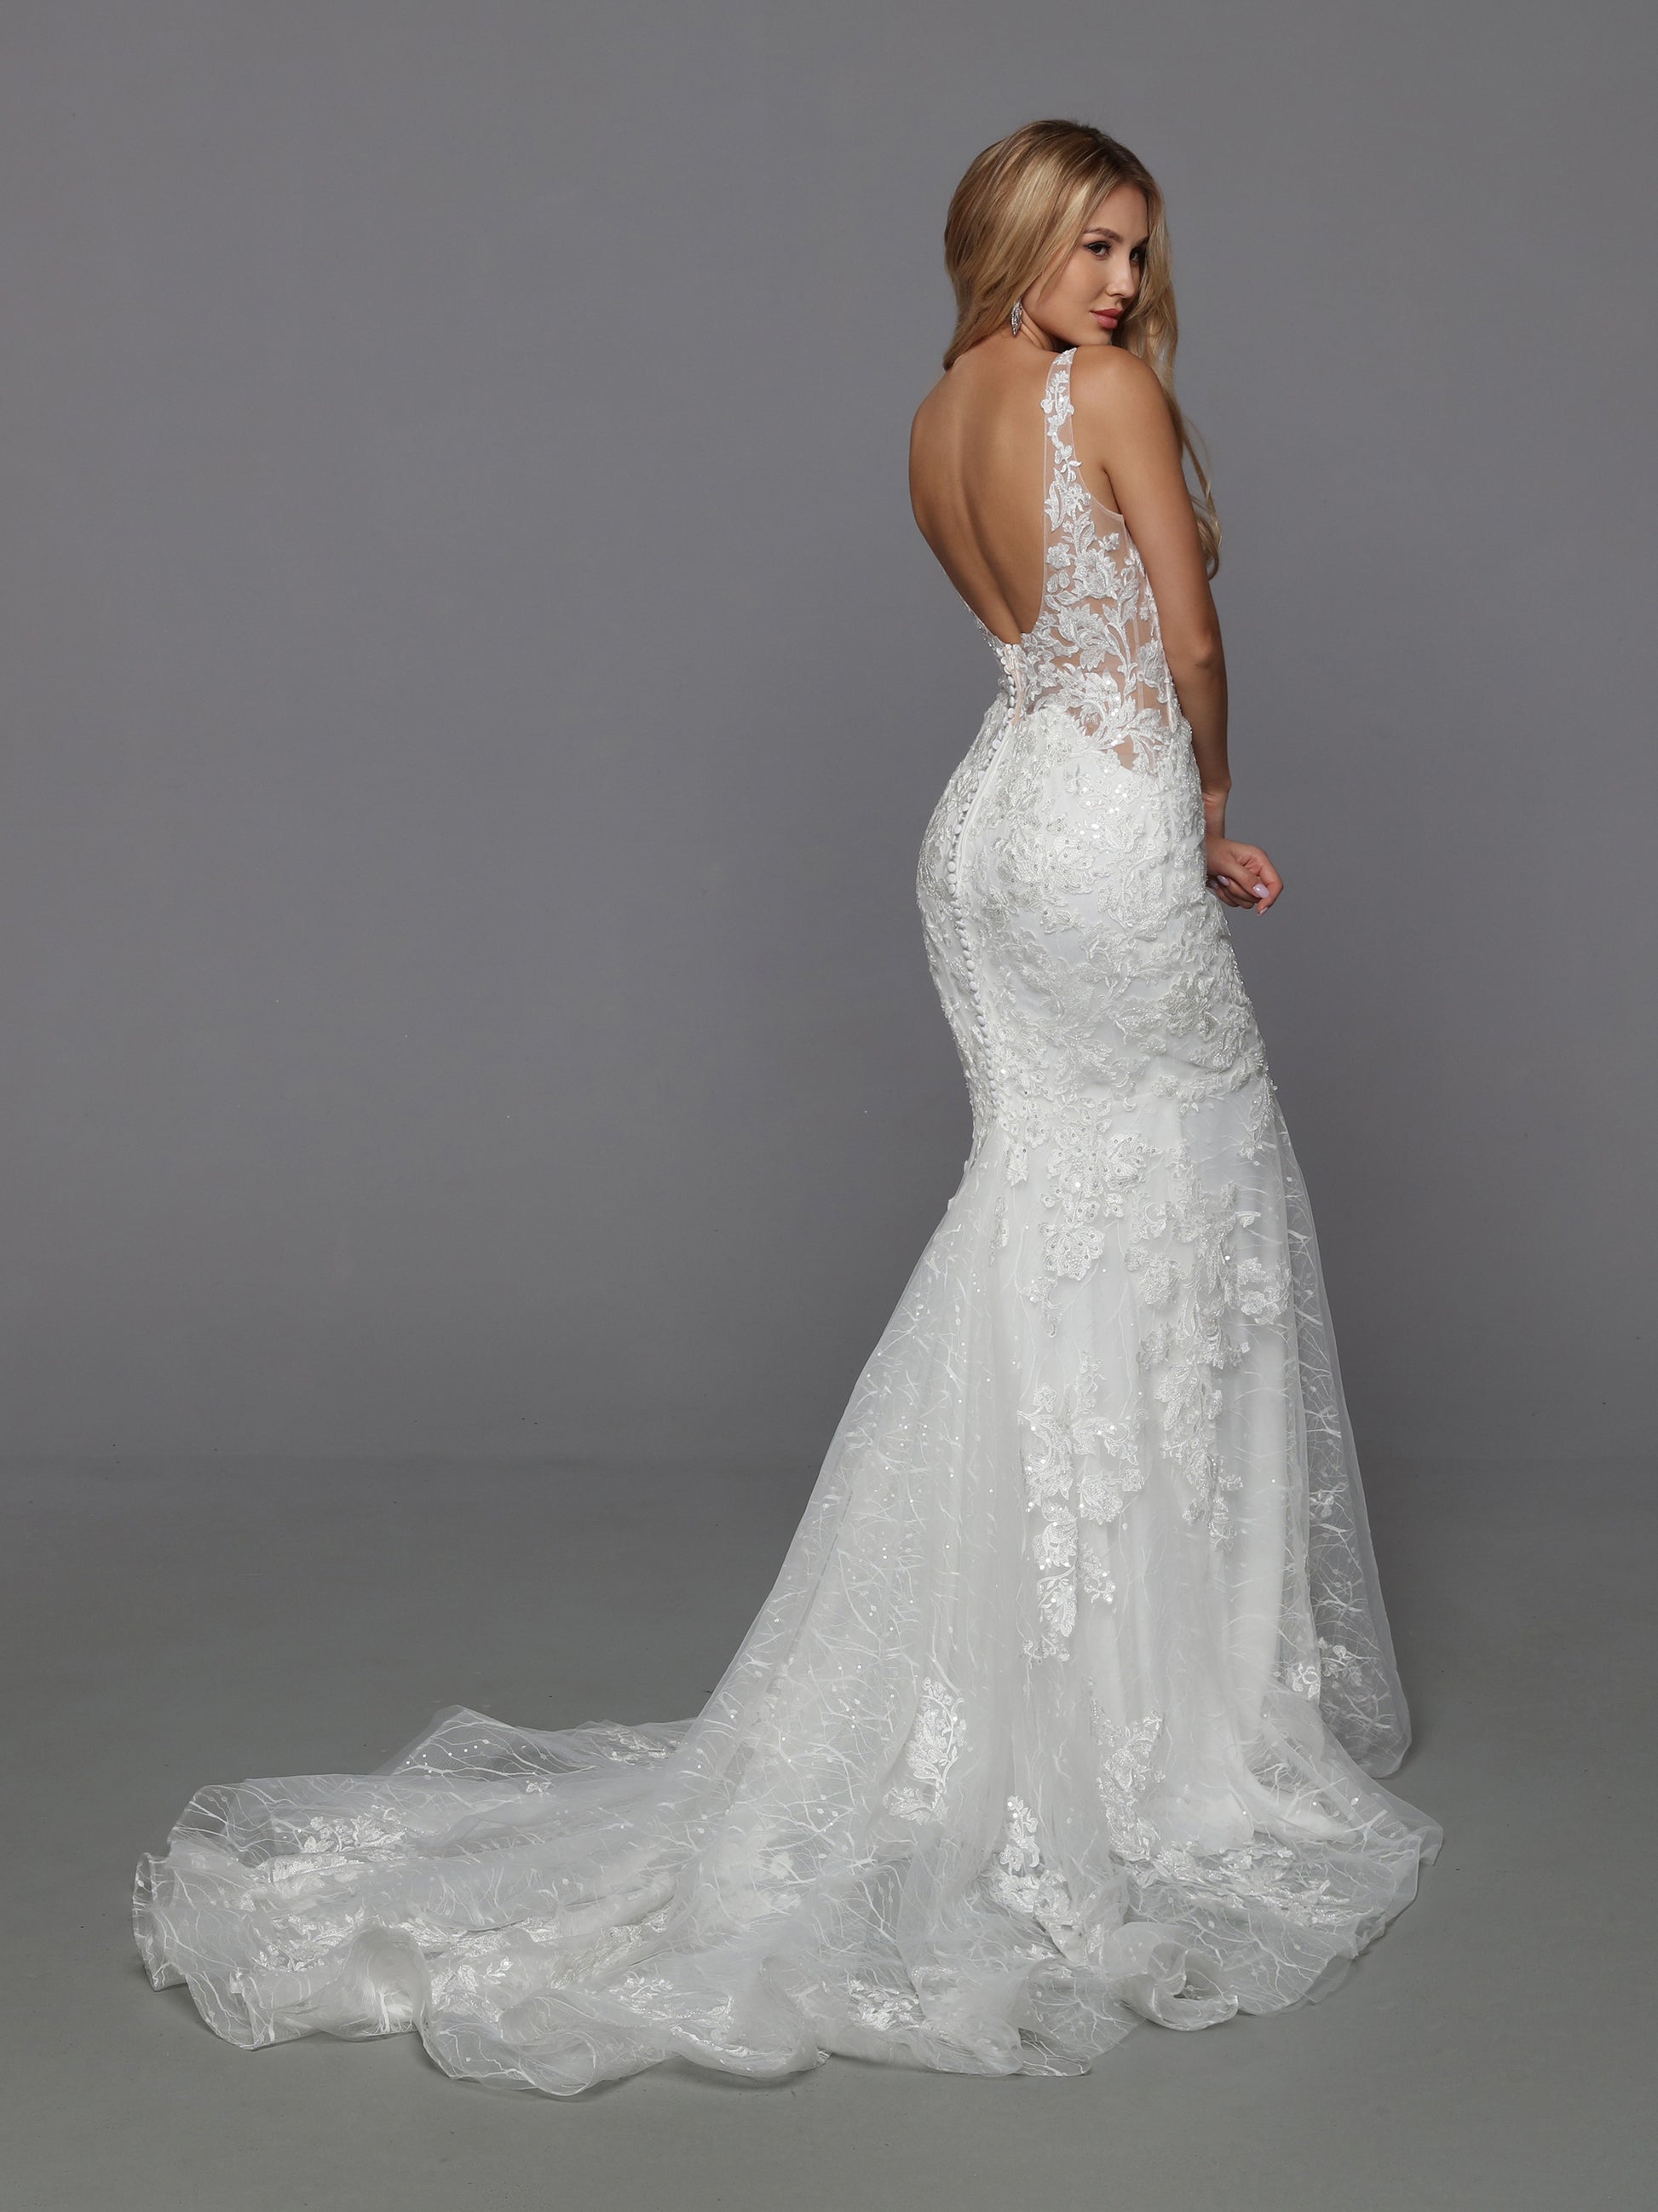 DaVinci Bridal 50770 Mermaid Fit And Flare V-Neck Lace Tulle Open Back Train Wedding Gown. This tempting slip dress has all the details you love. A sheer bodice covered with beaded lace applique, side cutouts, and a deep scoop back. A sheer textured lace skirt embellished with matching applique. And the finishing touch of a row of covered buttons running from the back waistline to the chapel train.